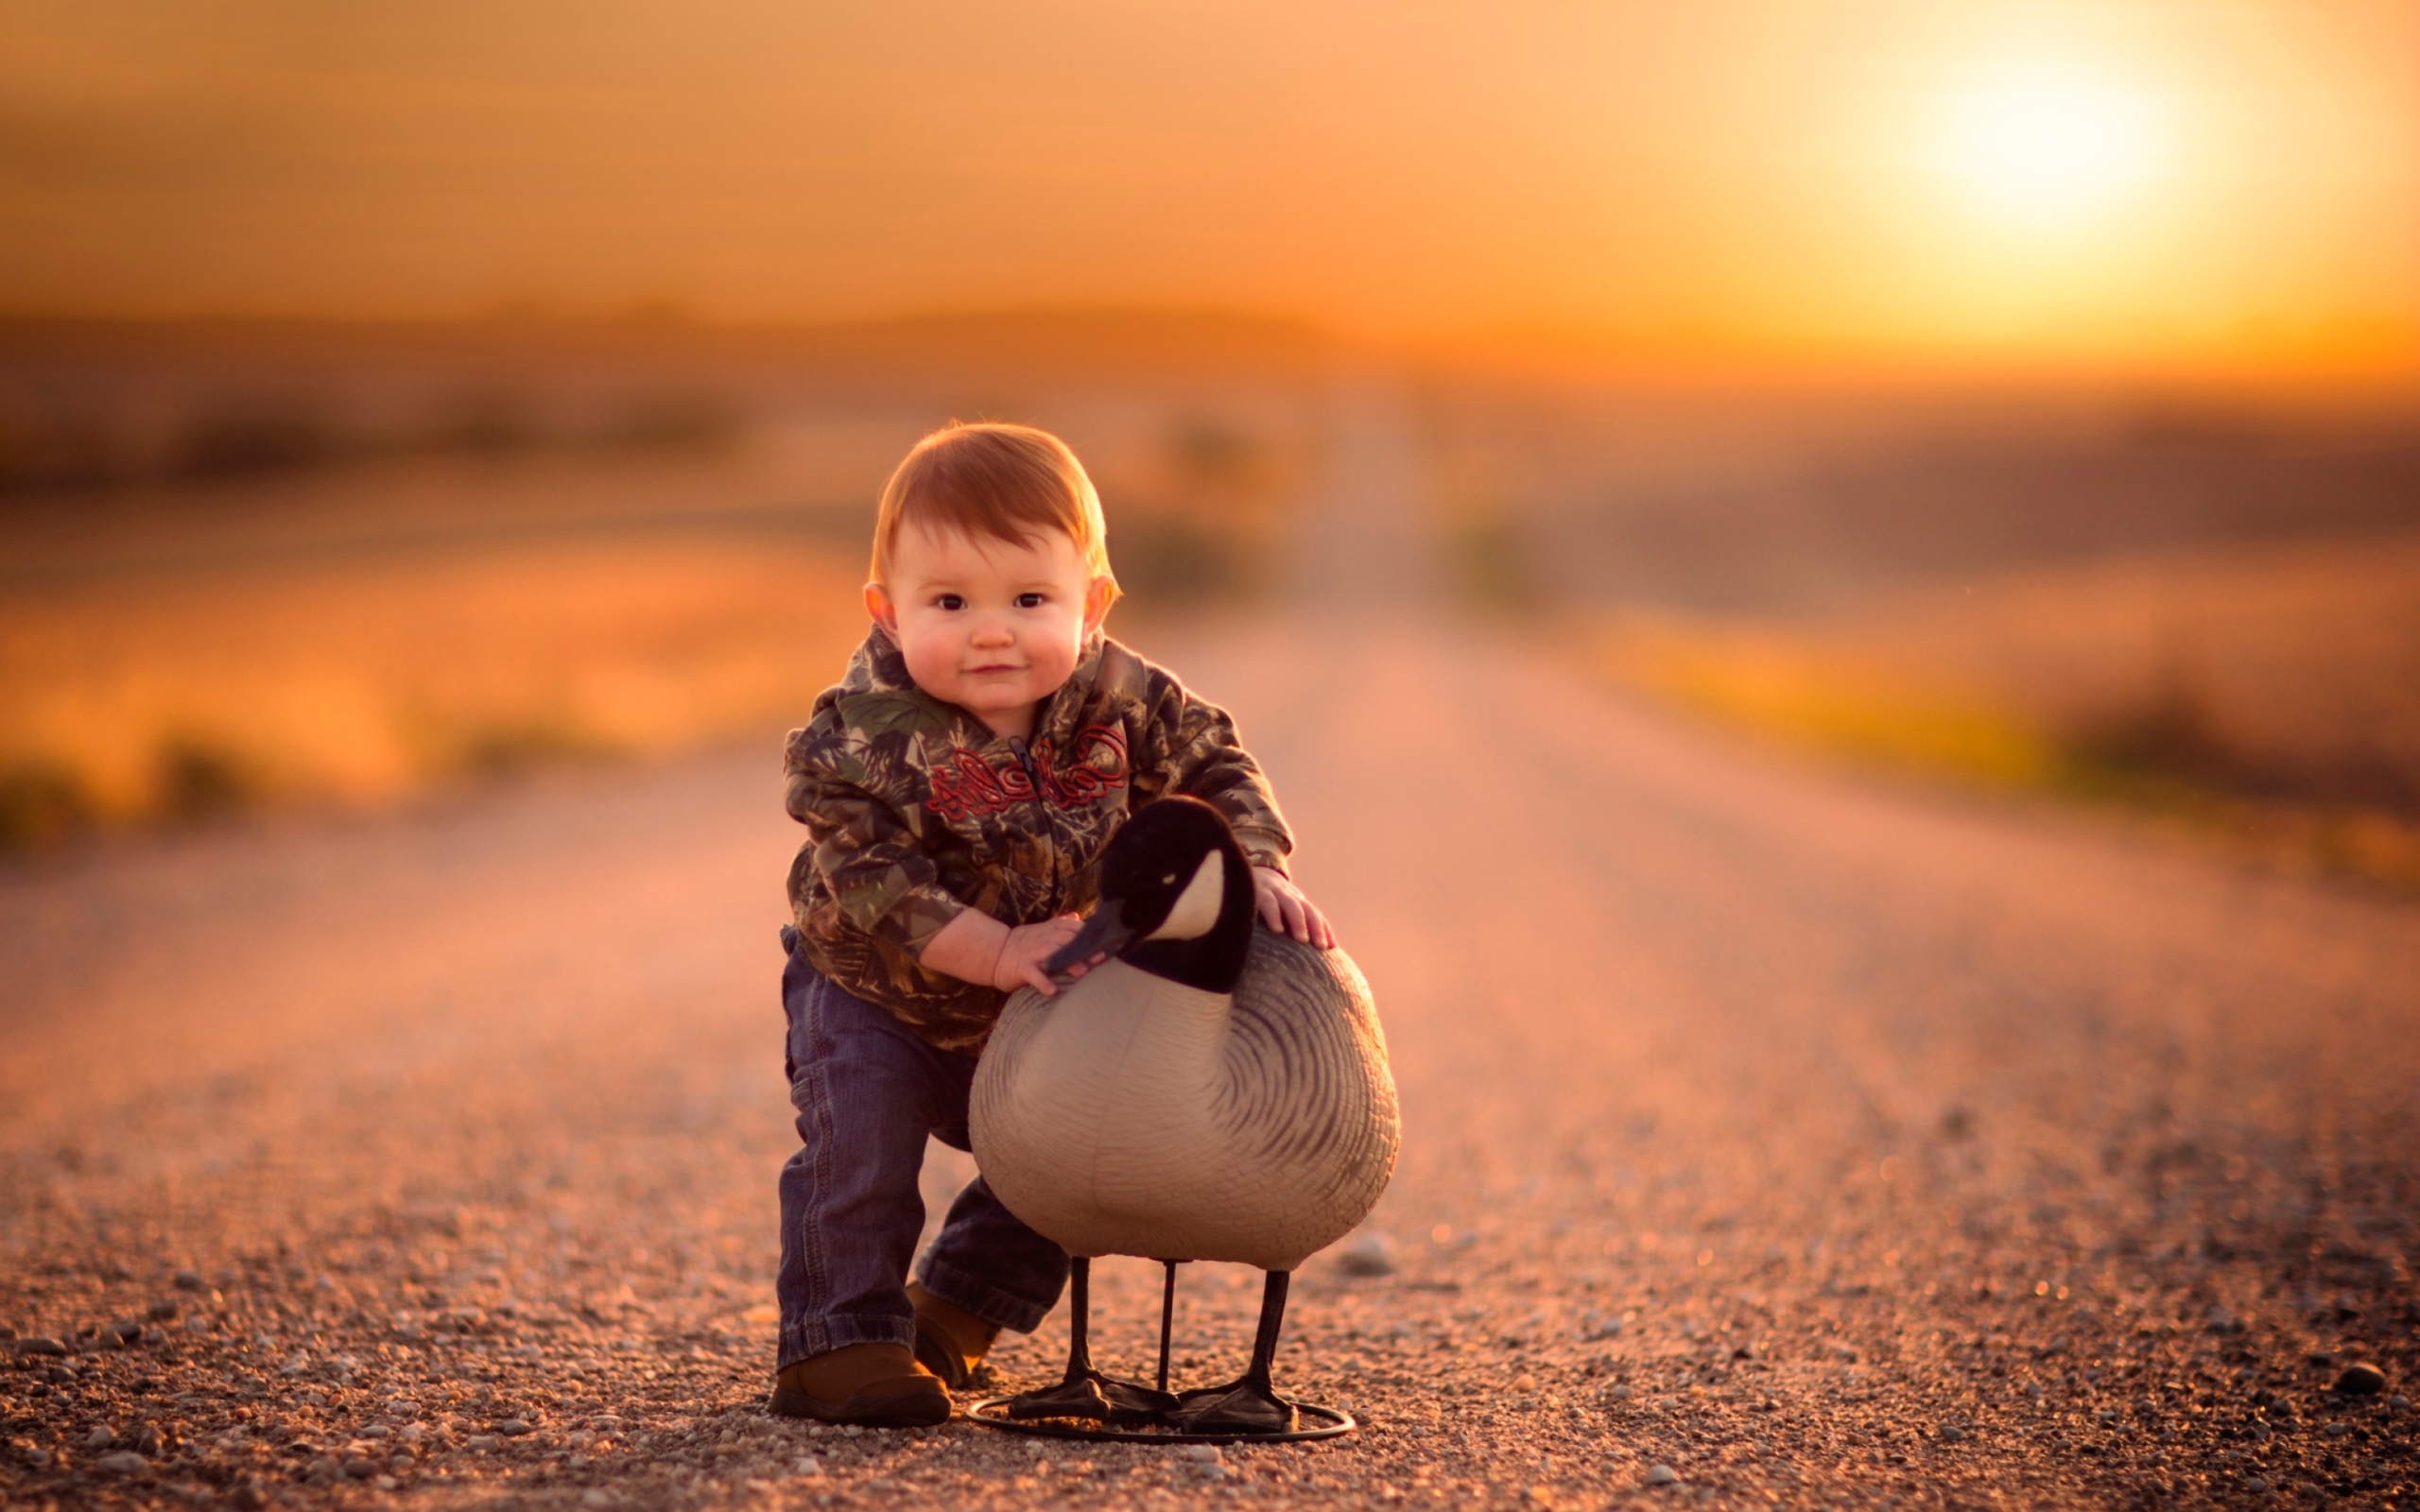 Kid and Duck wallpaper 2560x1600